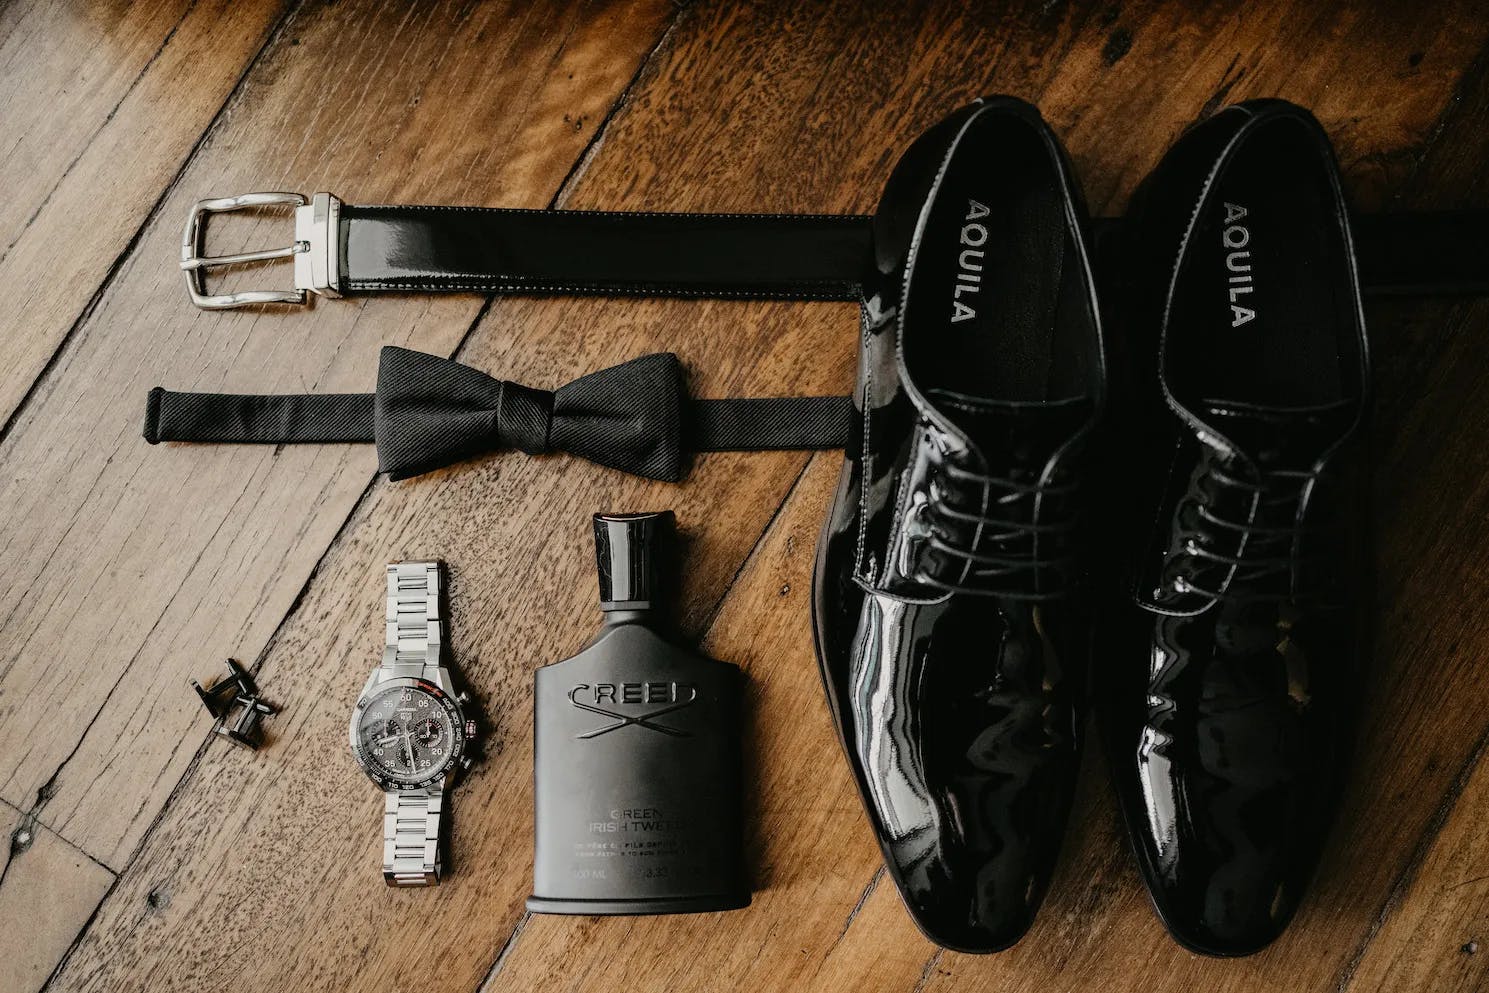 Mens shoes, belt, watch and cologne